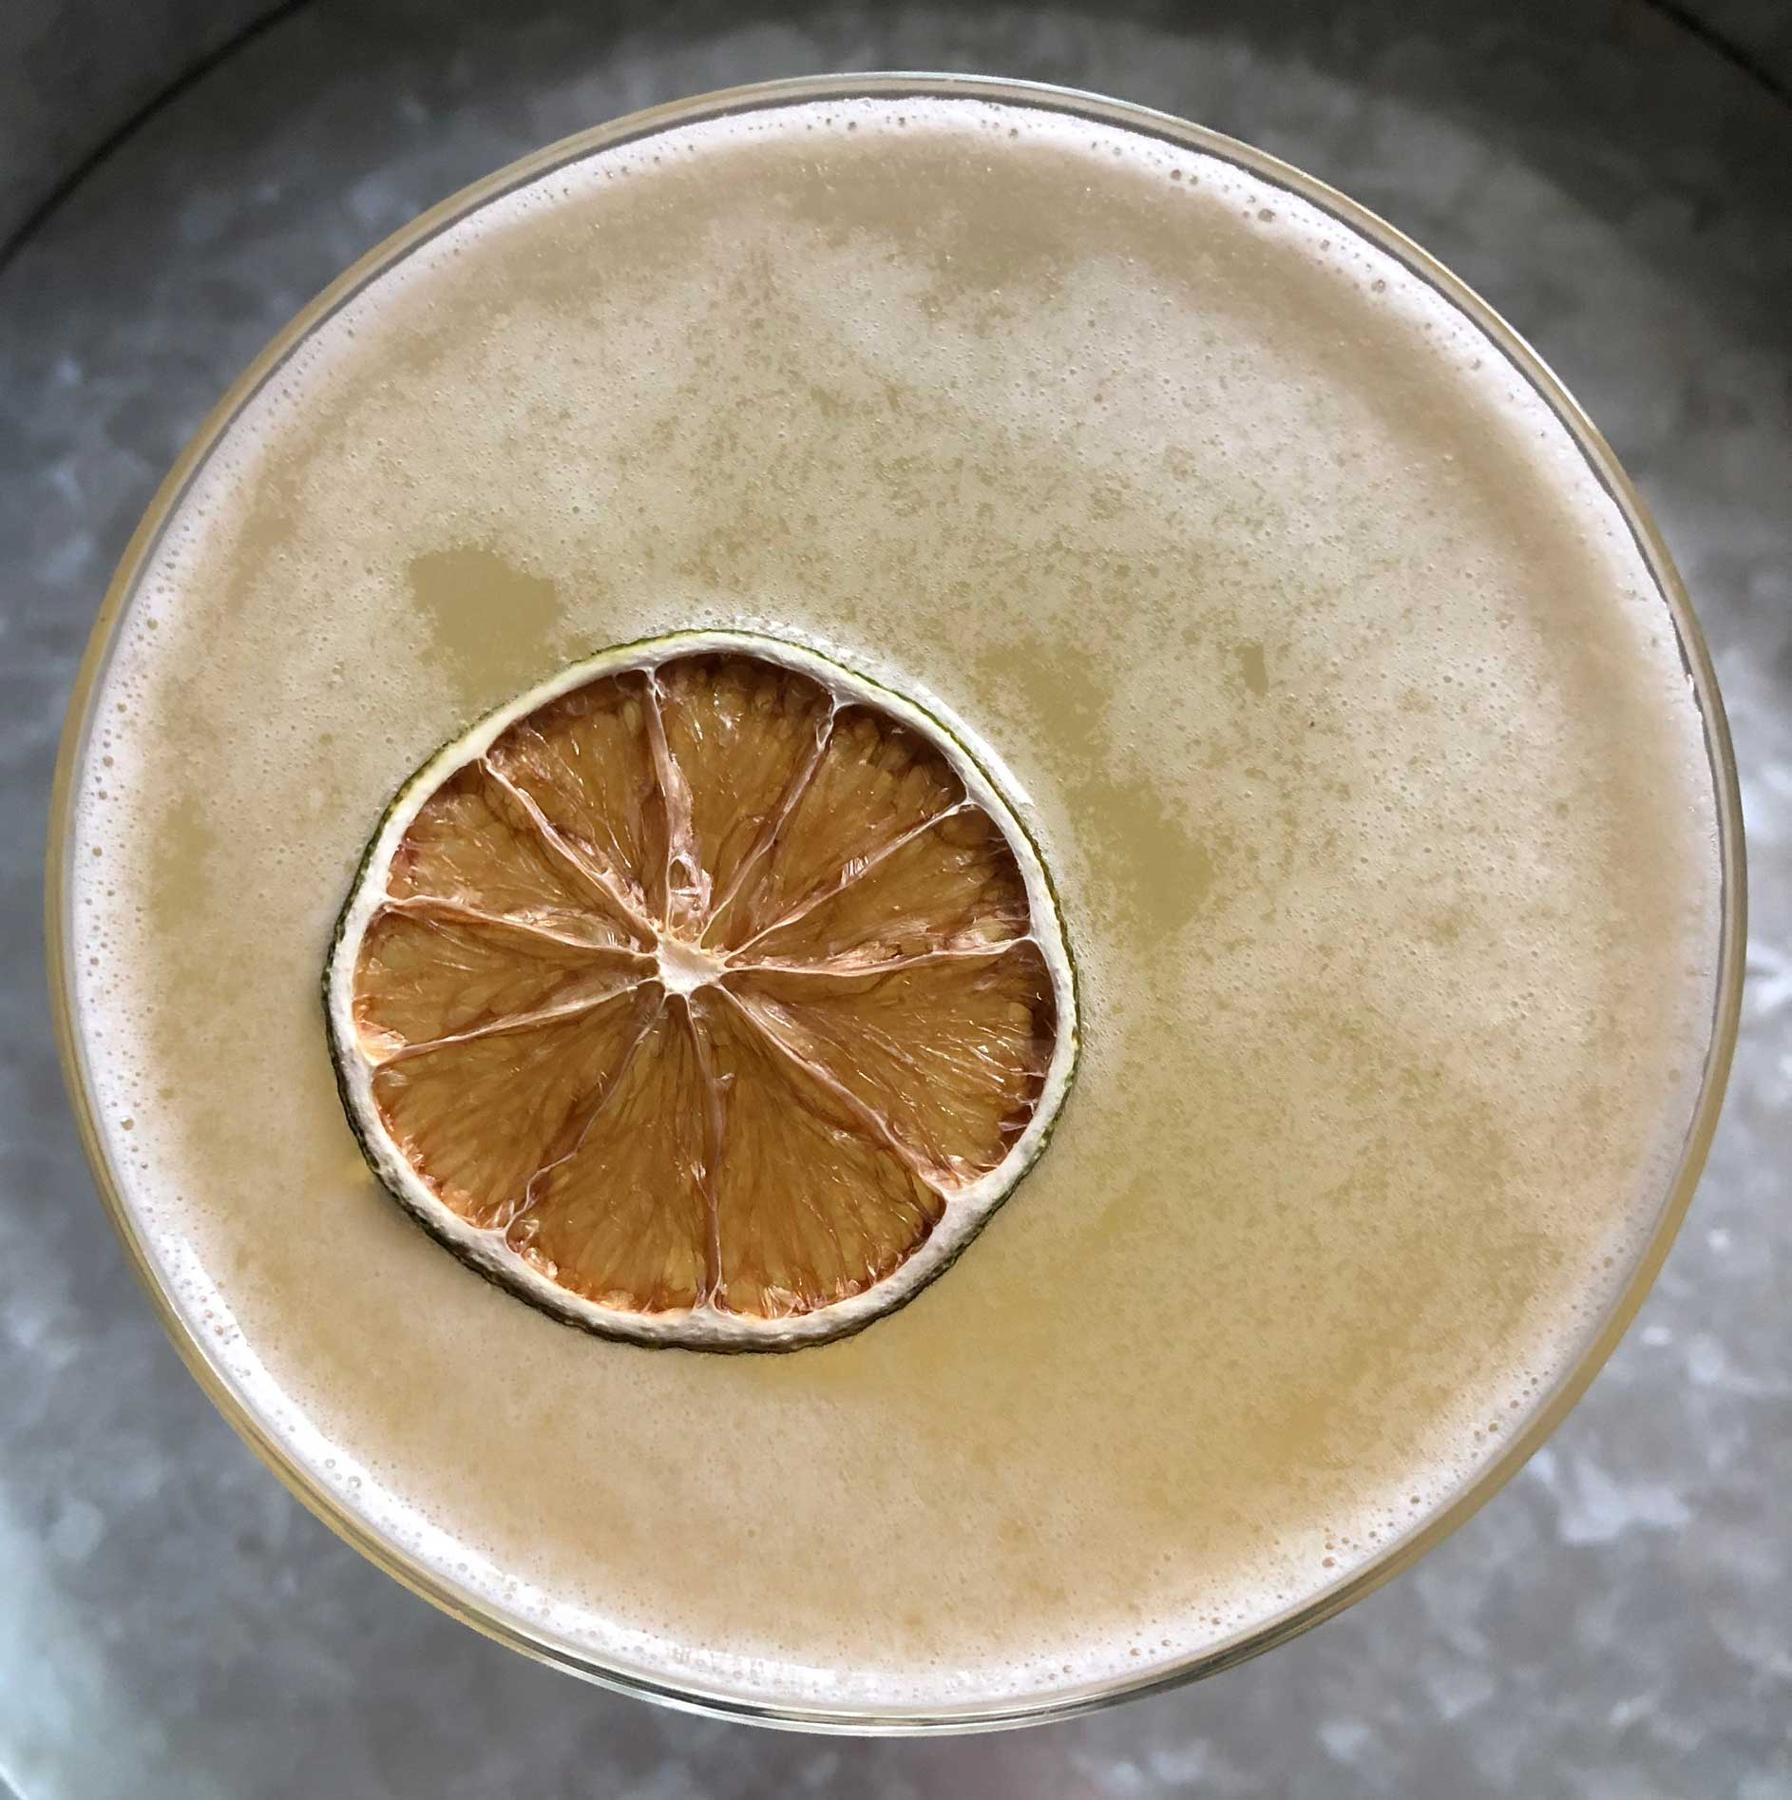 An example of the Airmail, the mixed drink (drink) featuring sparkling wine, Batavia Arrack van Oosten, lime juice, rich demerara syrup, and lime wheel; photo by Lee Edwards